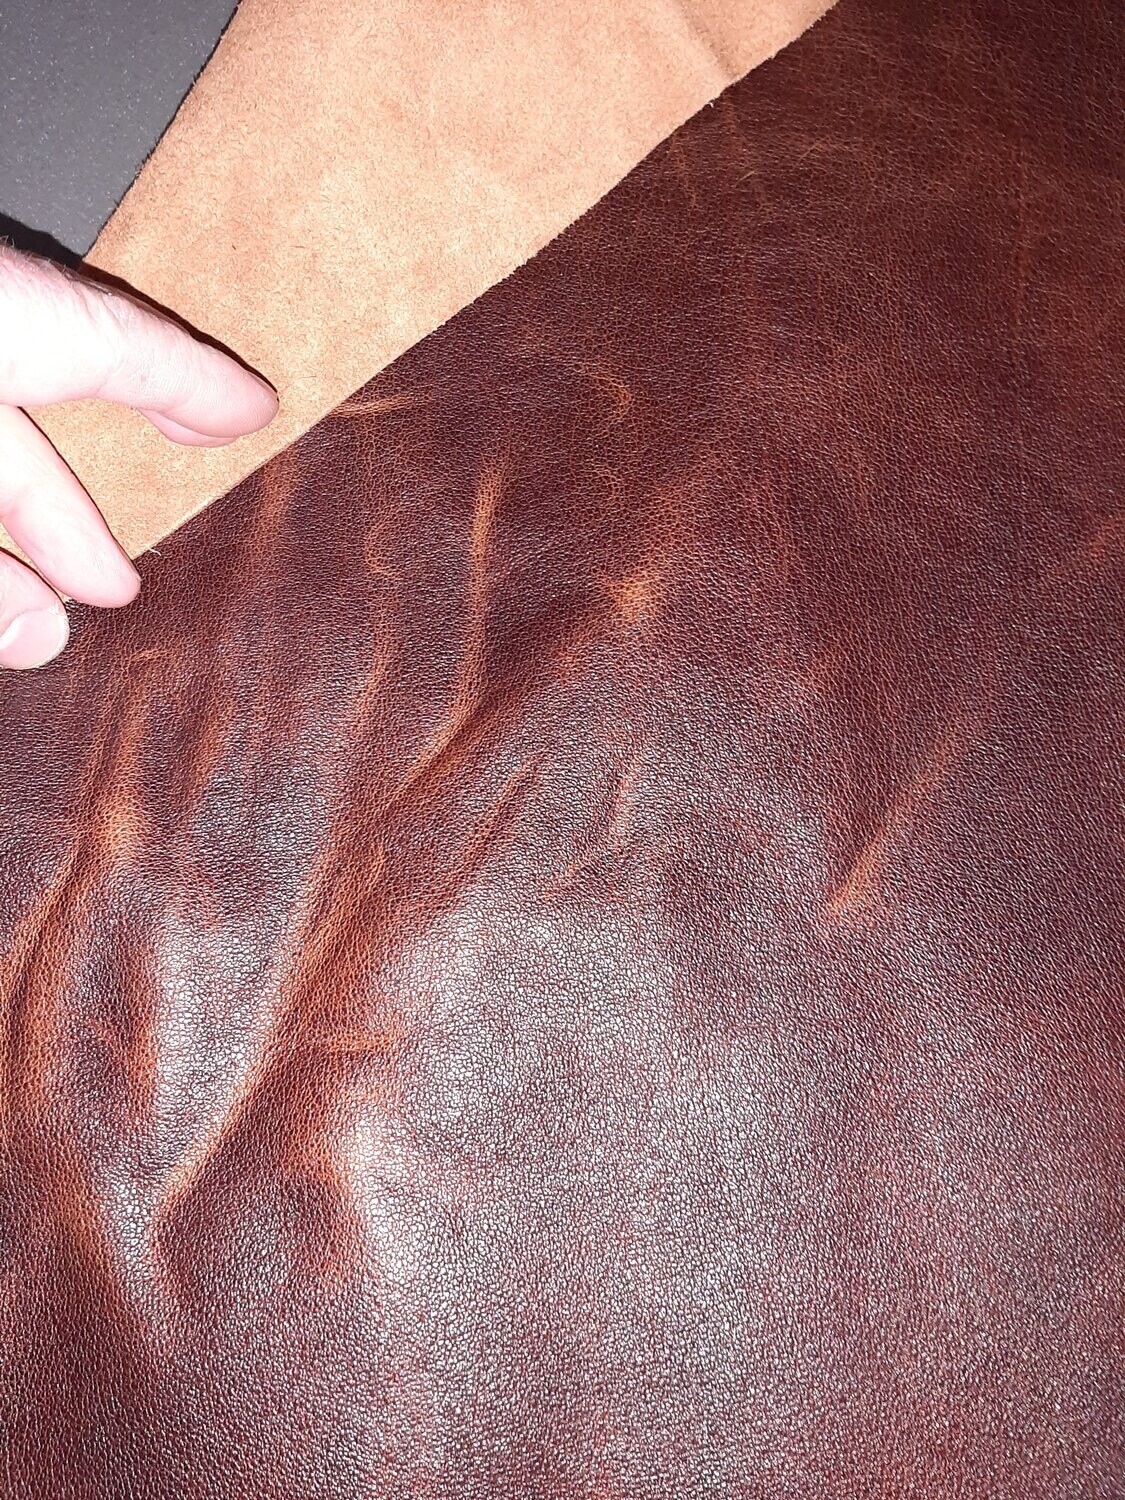 Large off cut - Leather bovine embossed brown